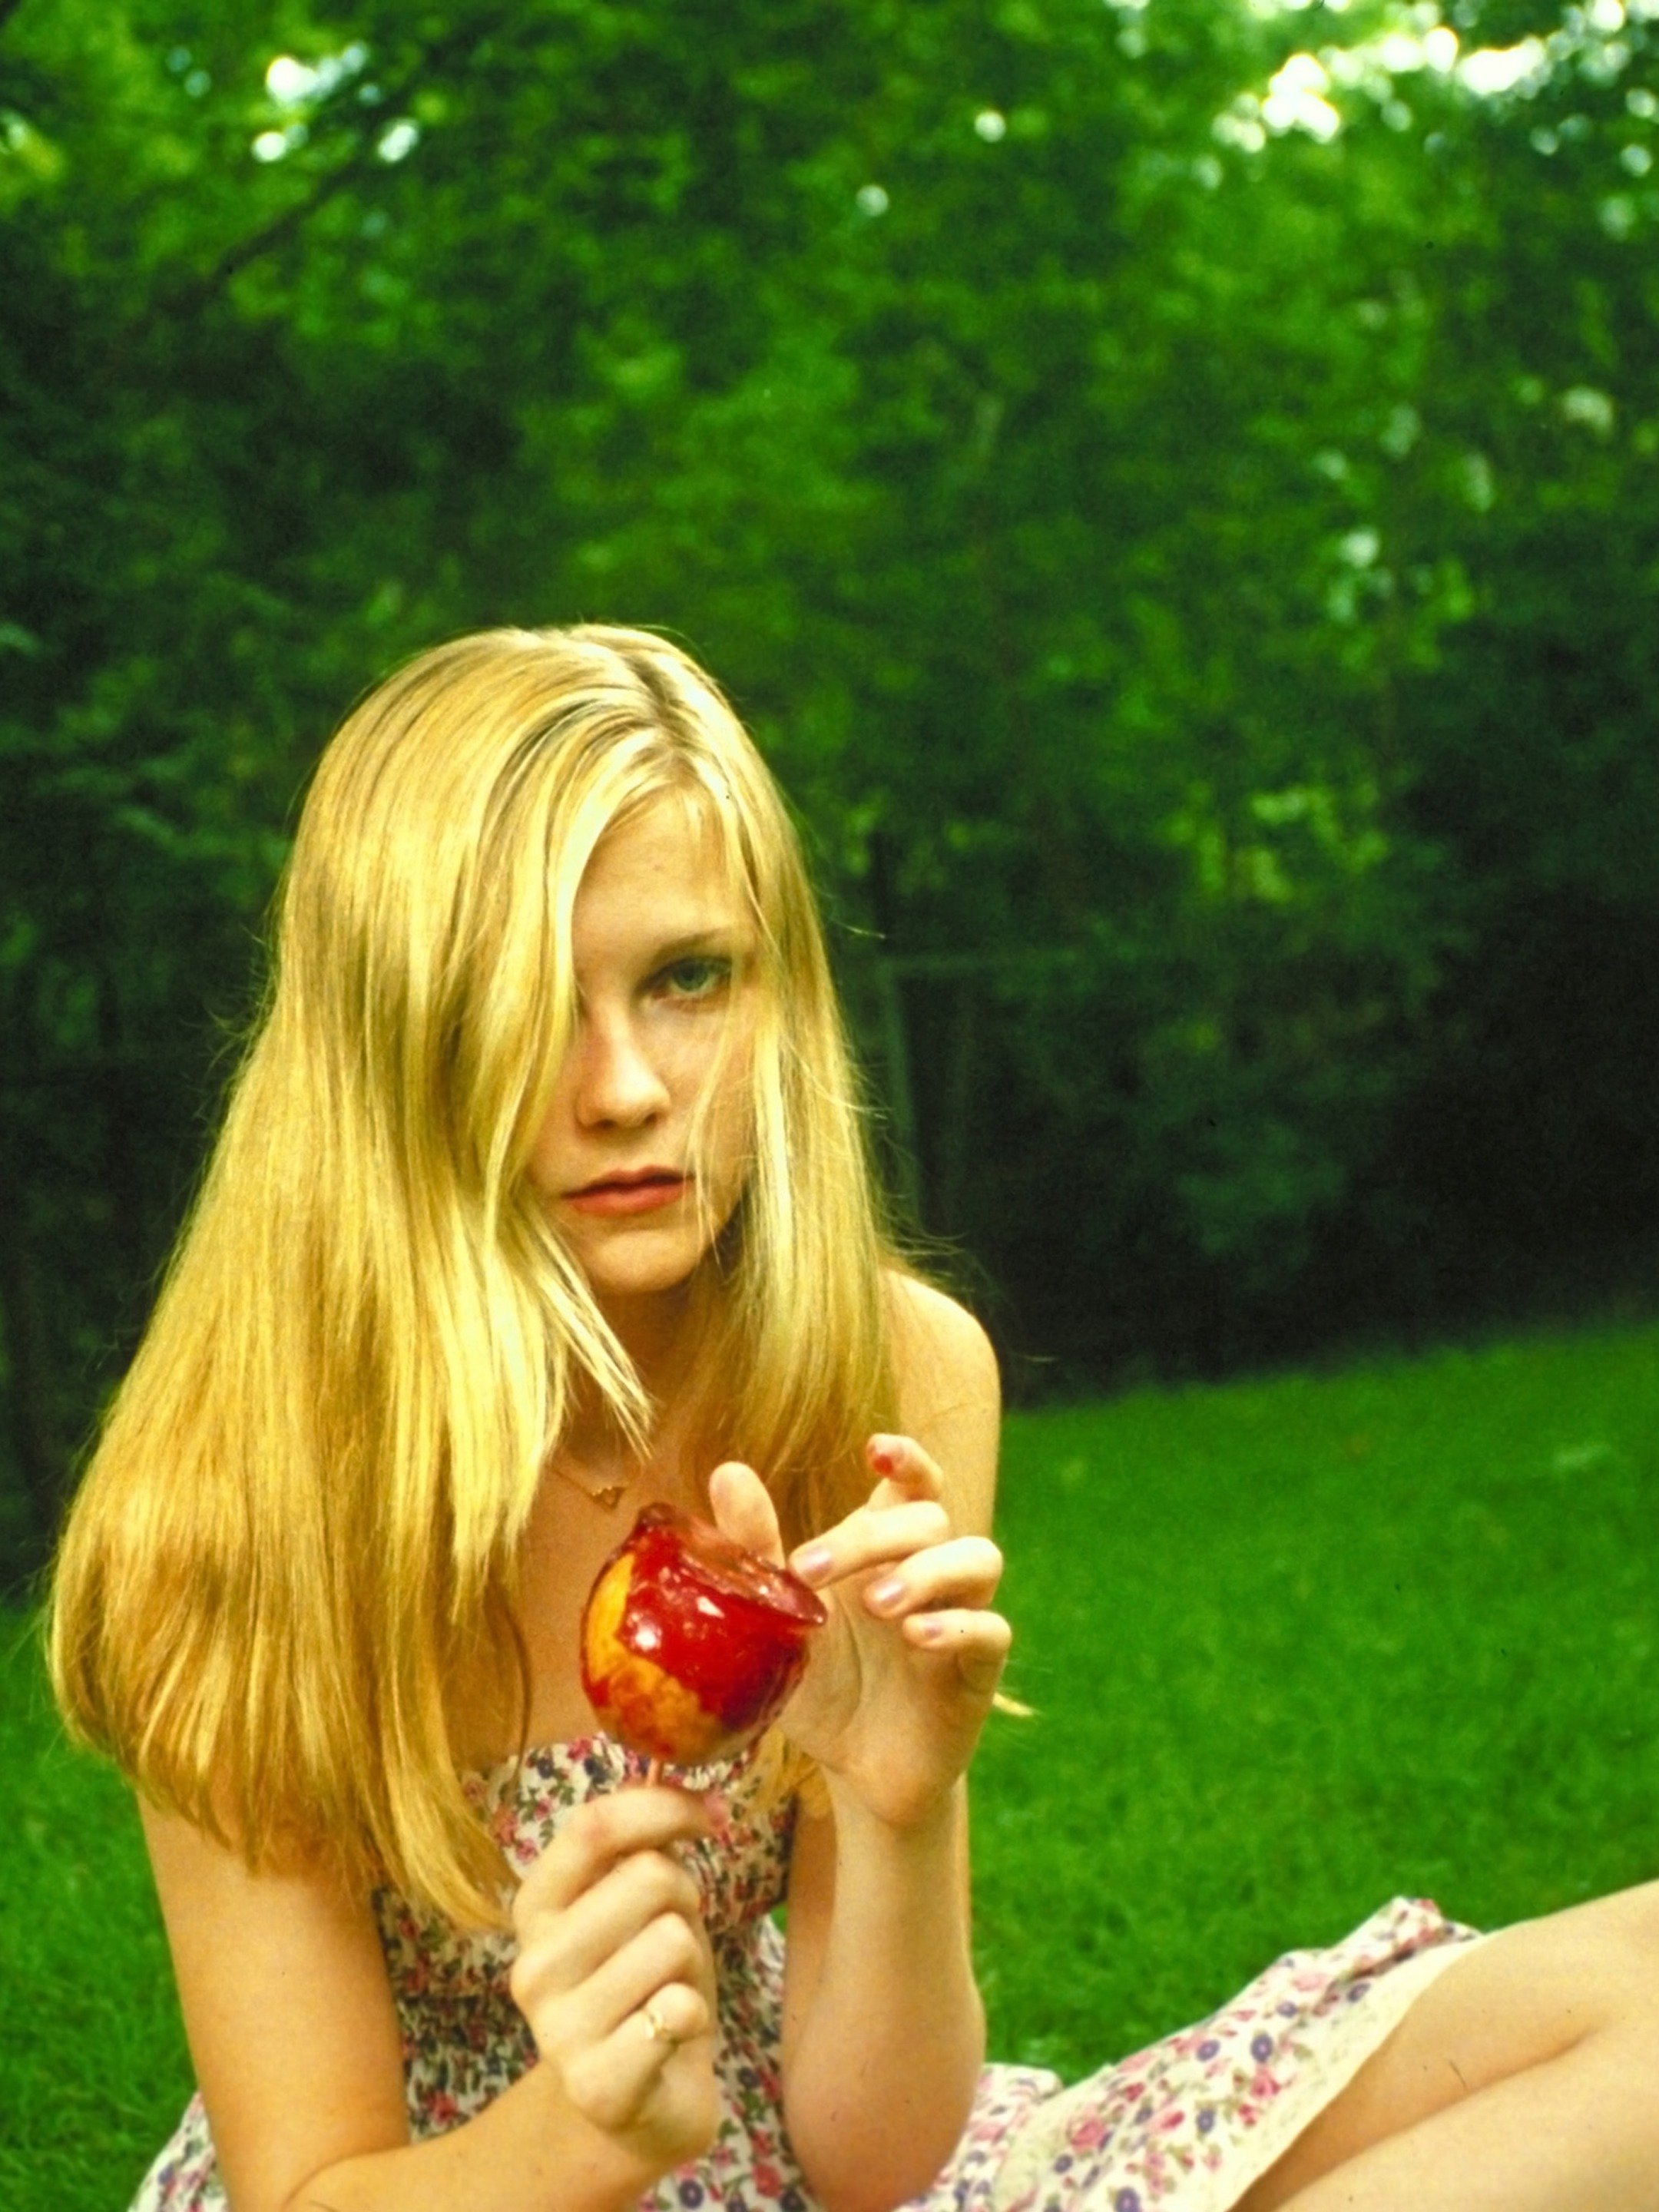 The Virgin Suicides Trailer Trailers Videos Rotten Tomatoes